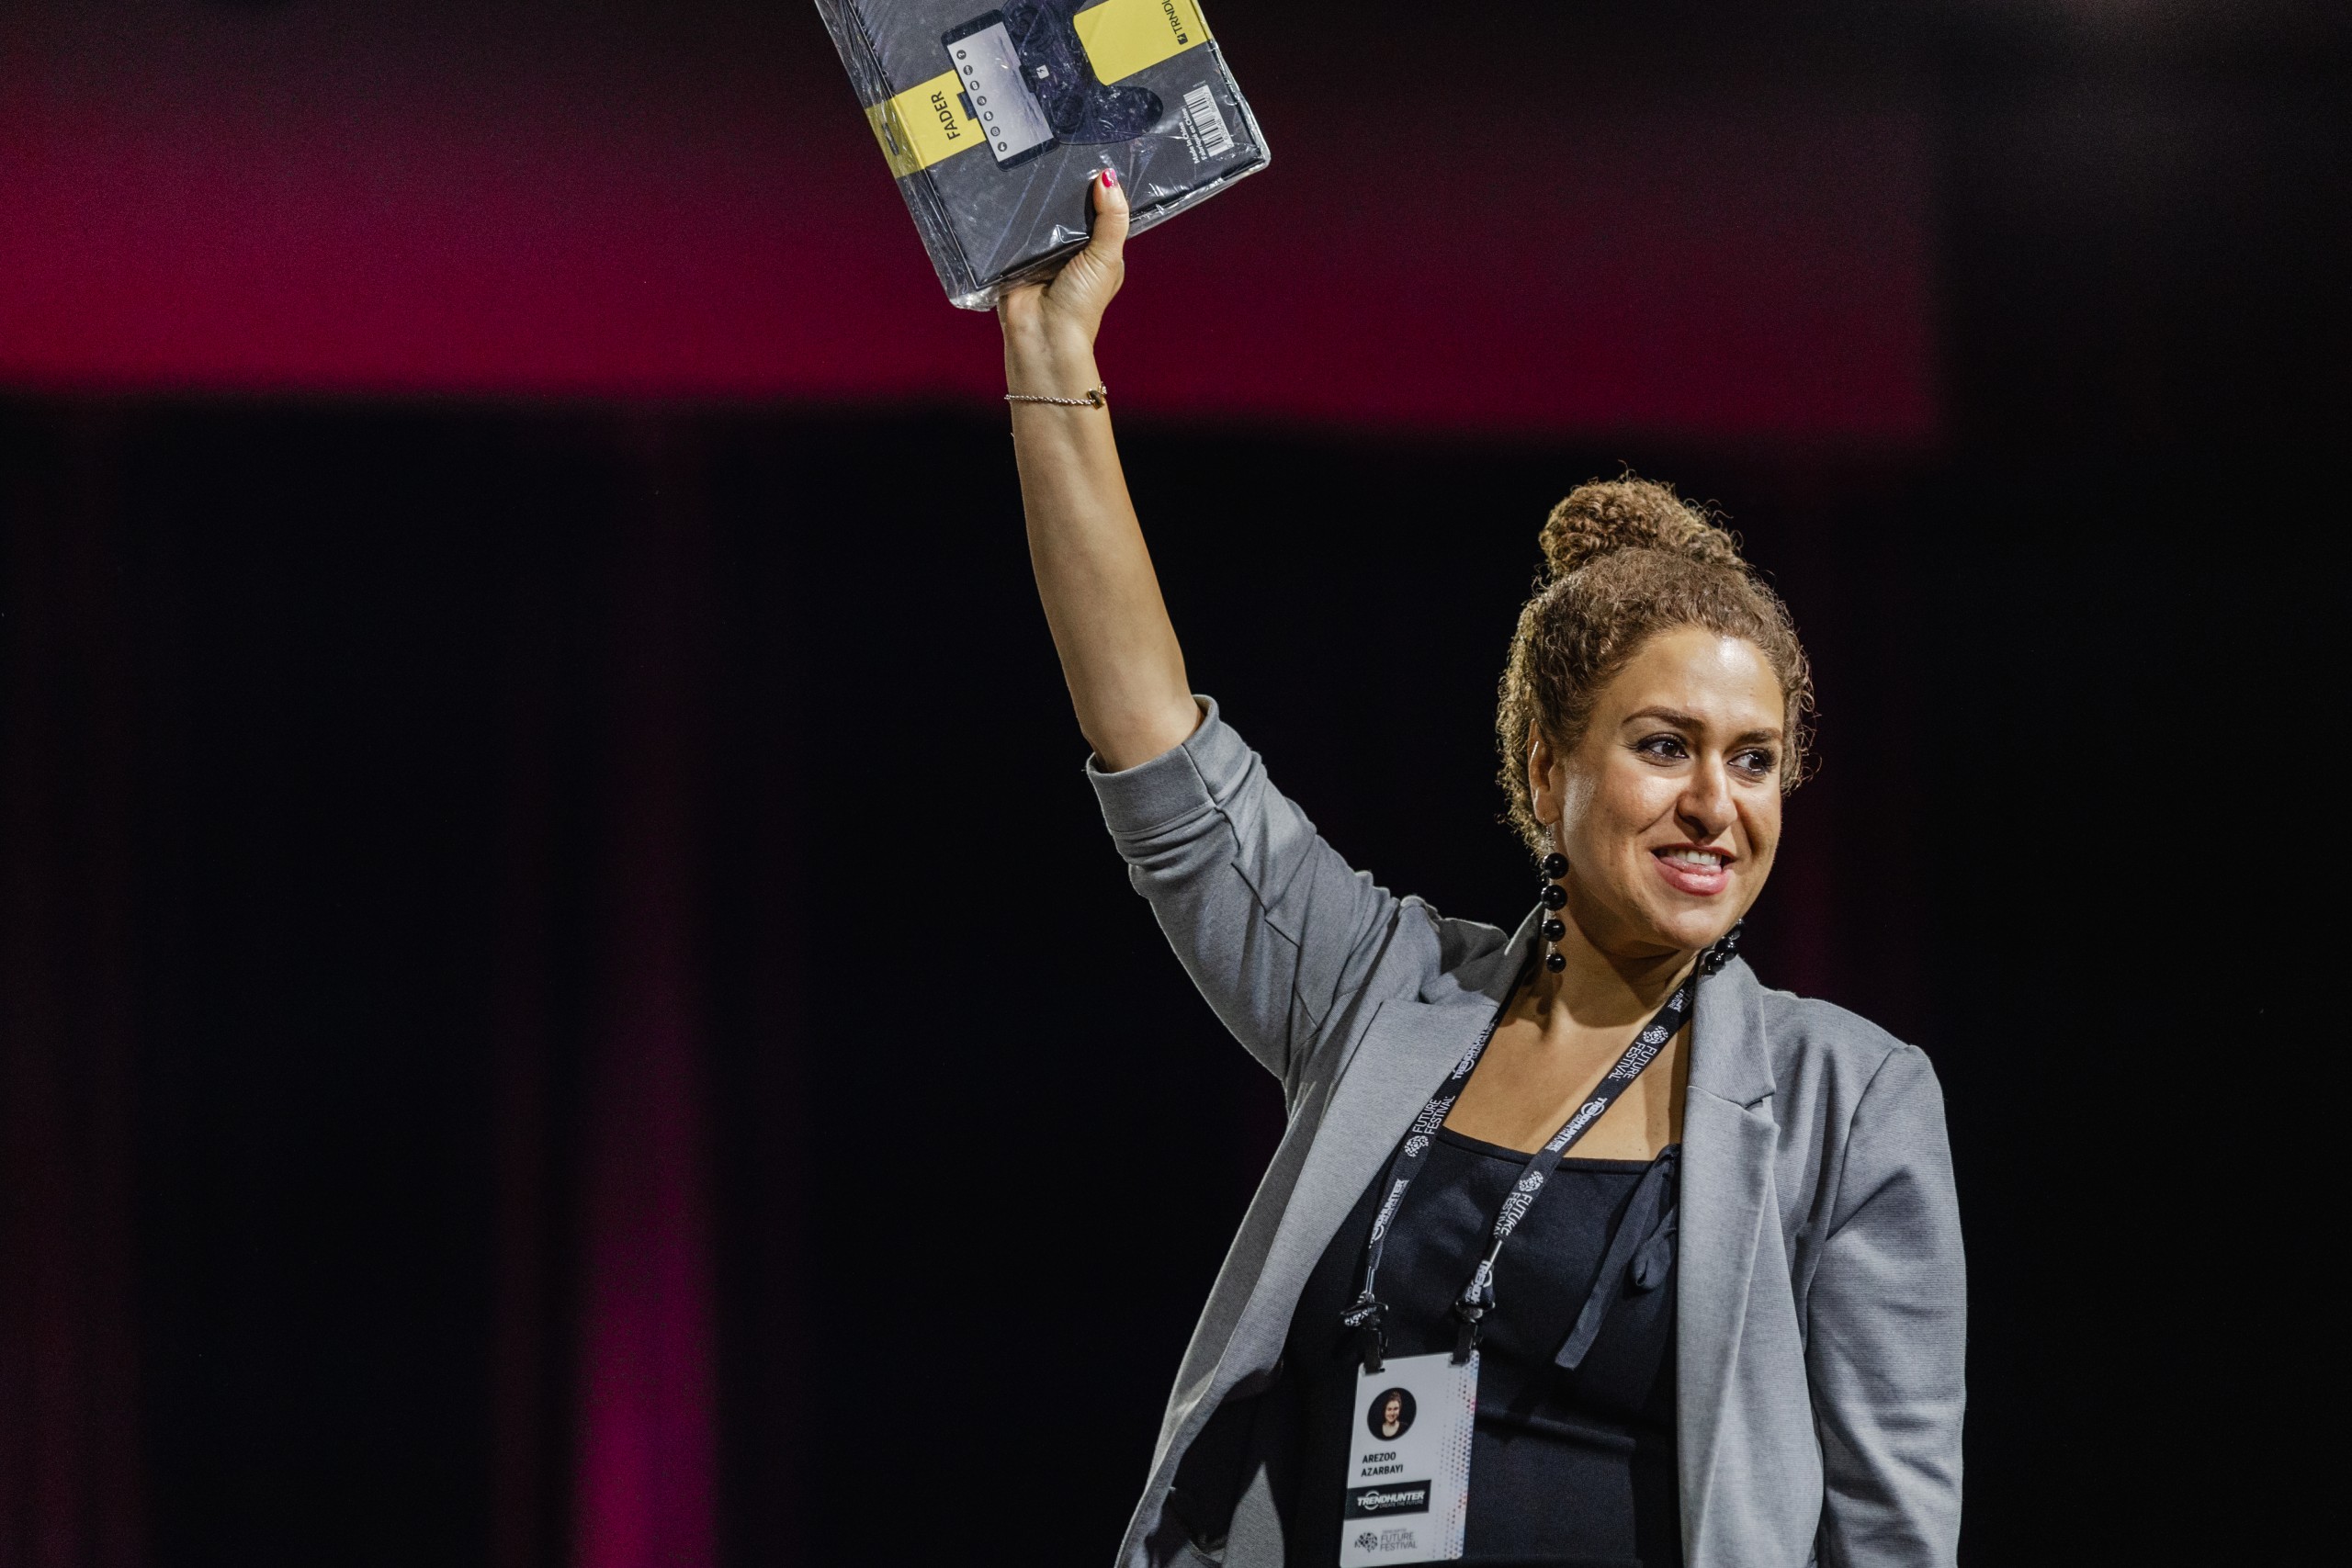 A woman holding up a book during an event on stage.